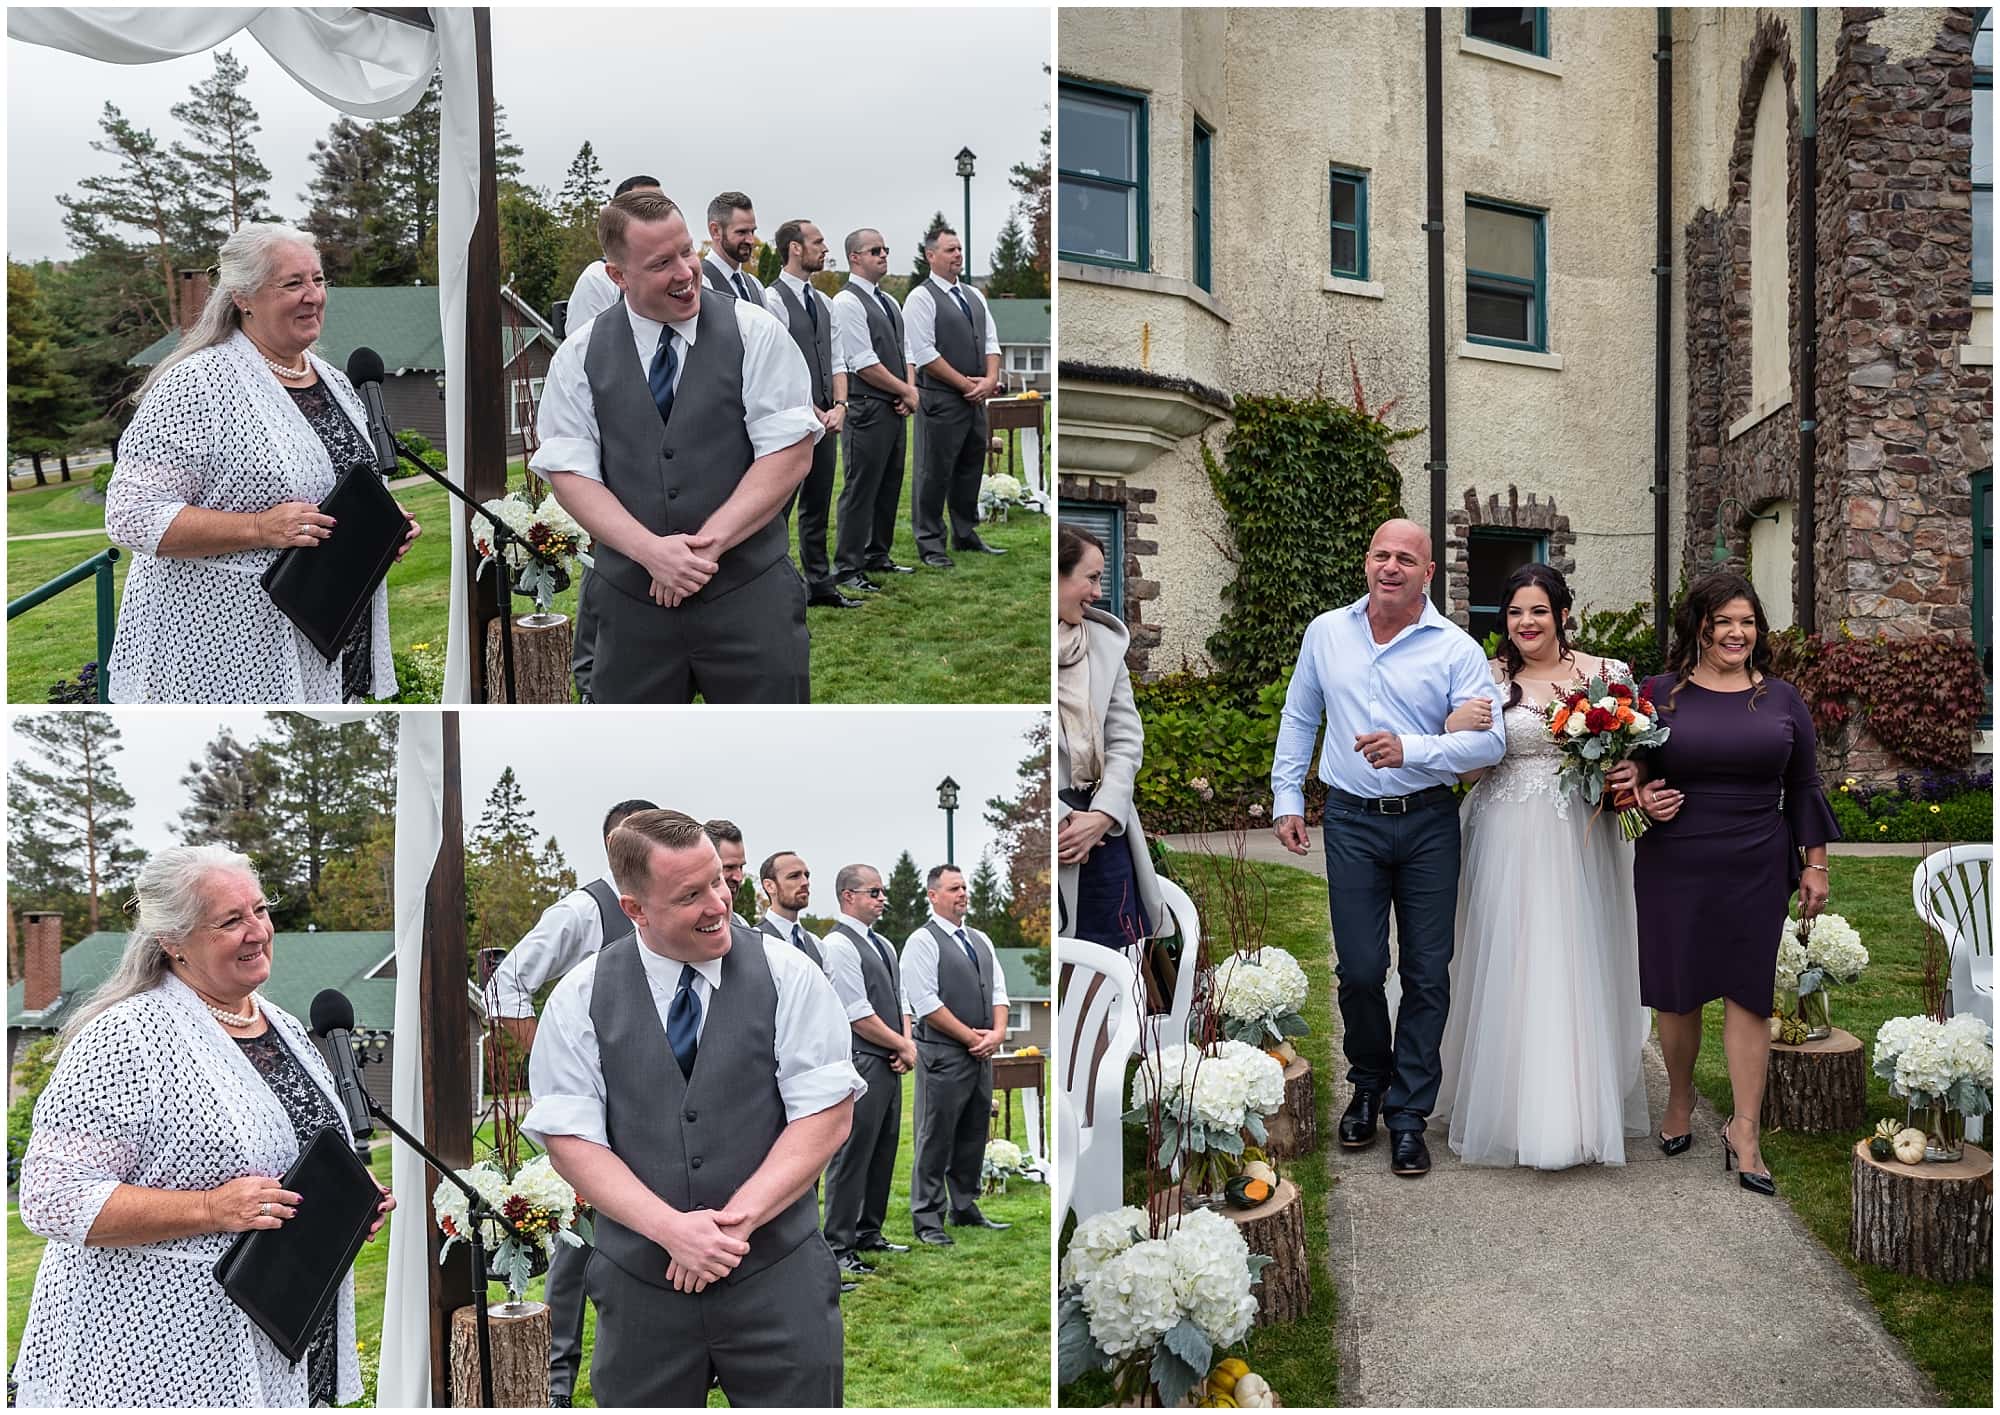 The groom has his first look of his bride walking up the aisle during their Digby Pines Resort wedding ceremony in Nova Scotia.